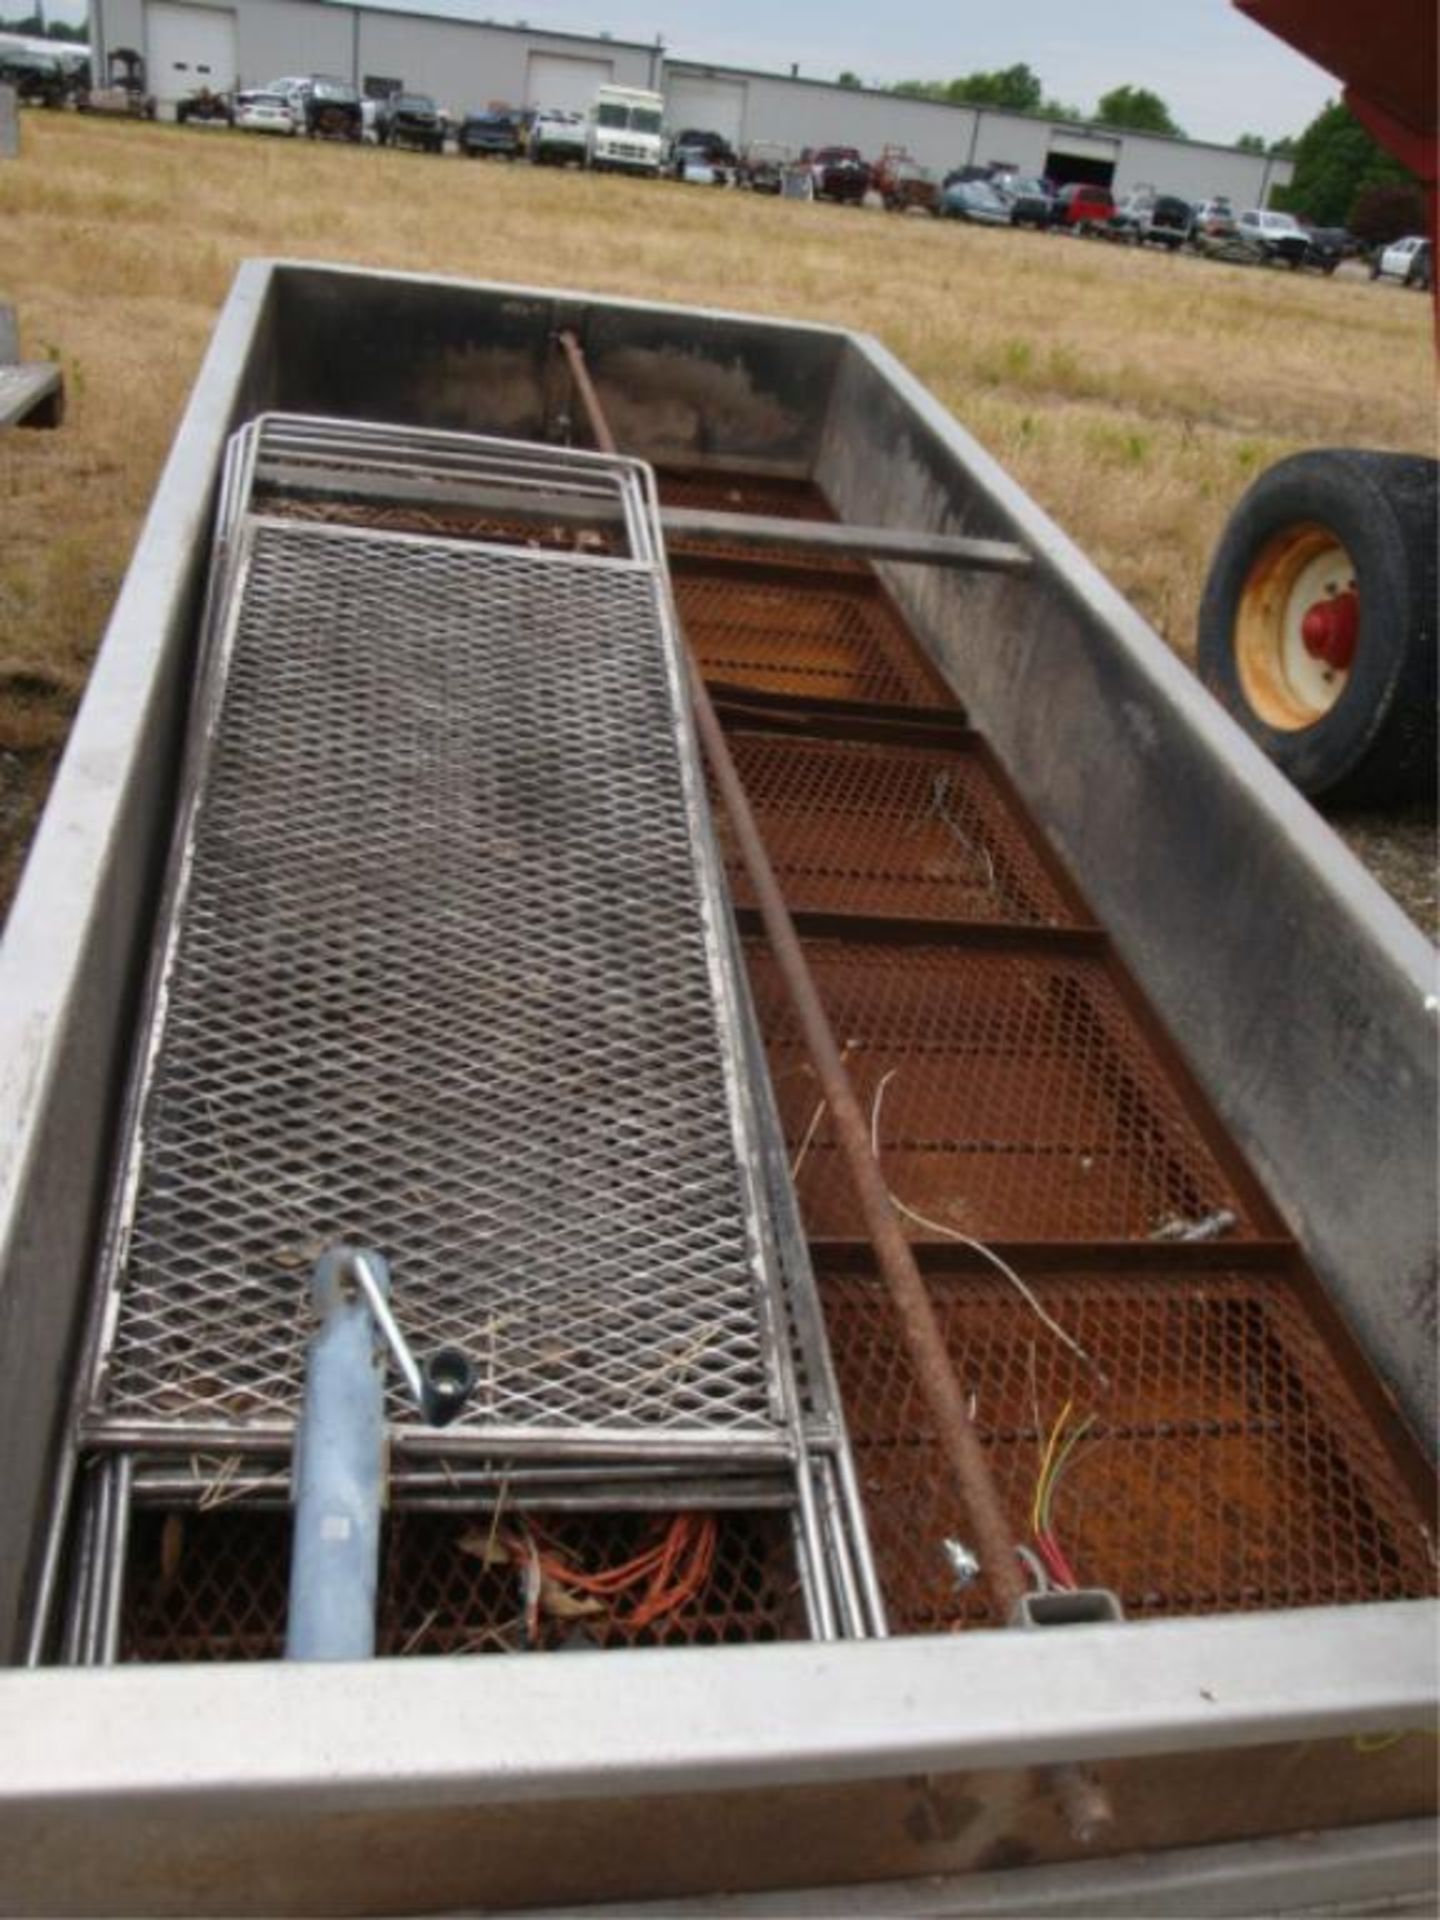 Stainless steel charcoal barbecue grill trailer4'x10' - Image 4 of 6